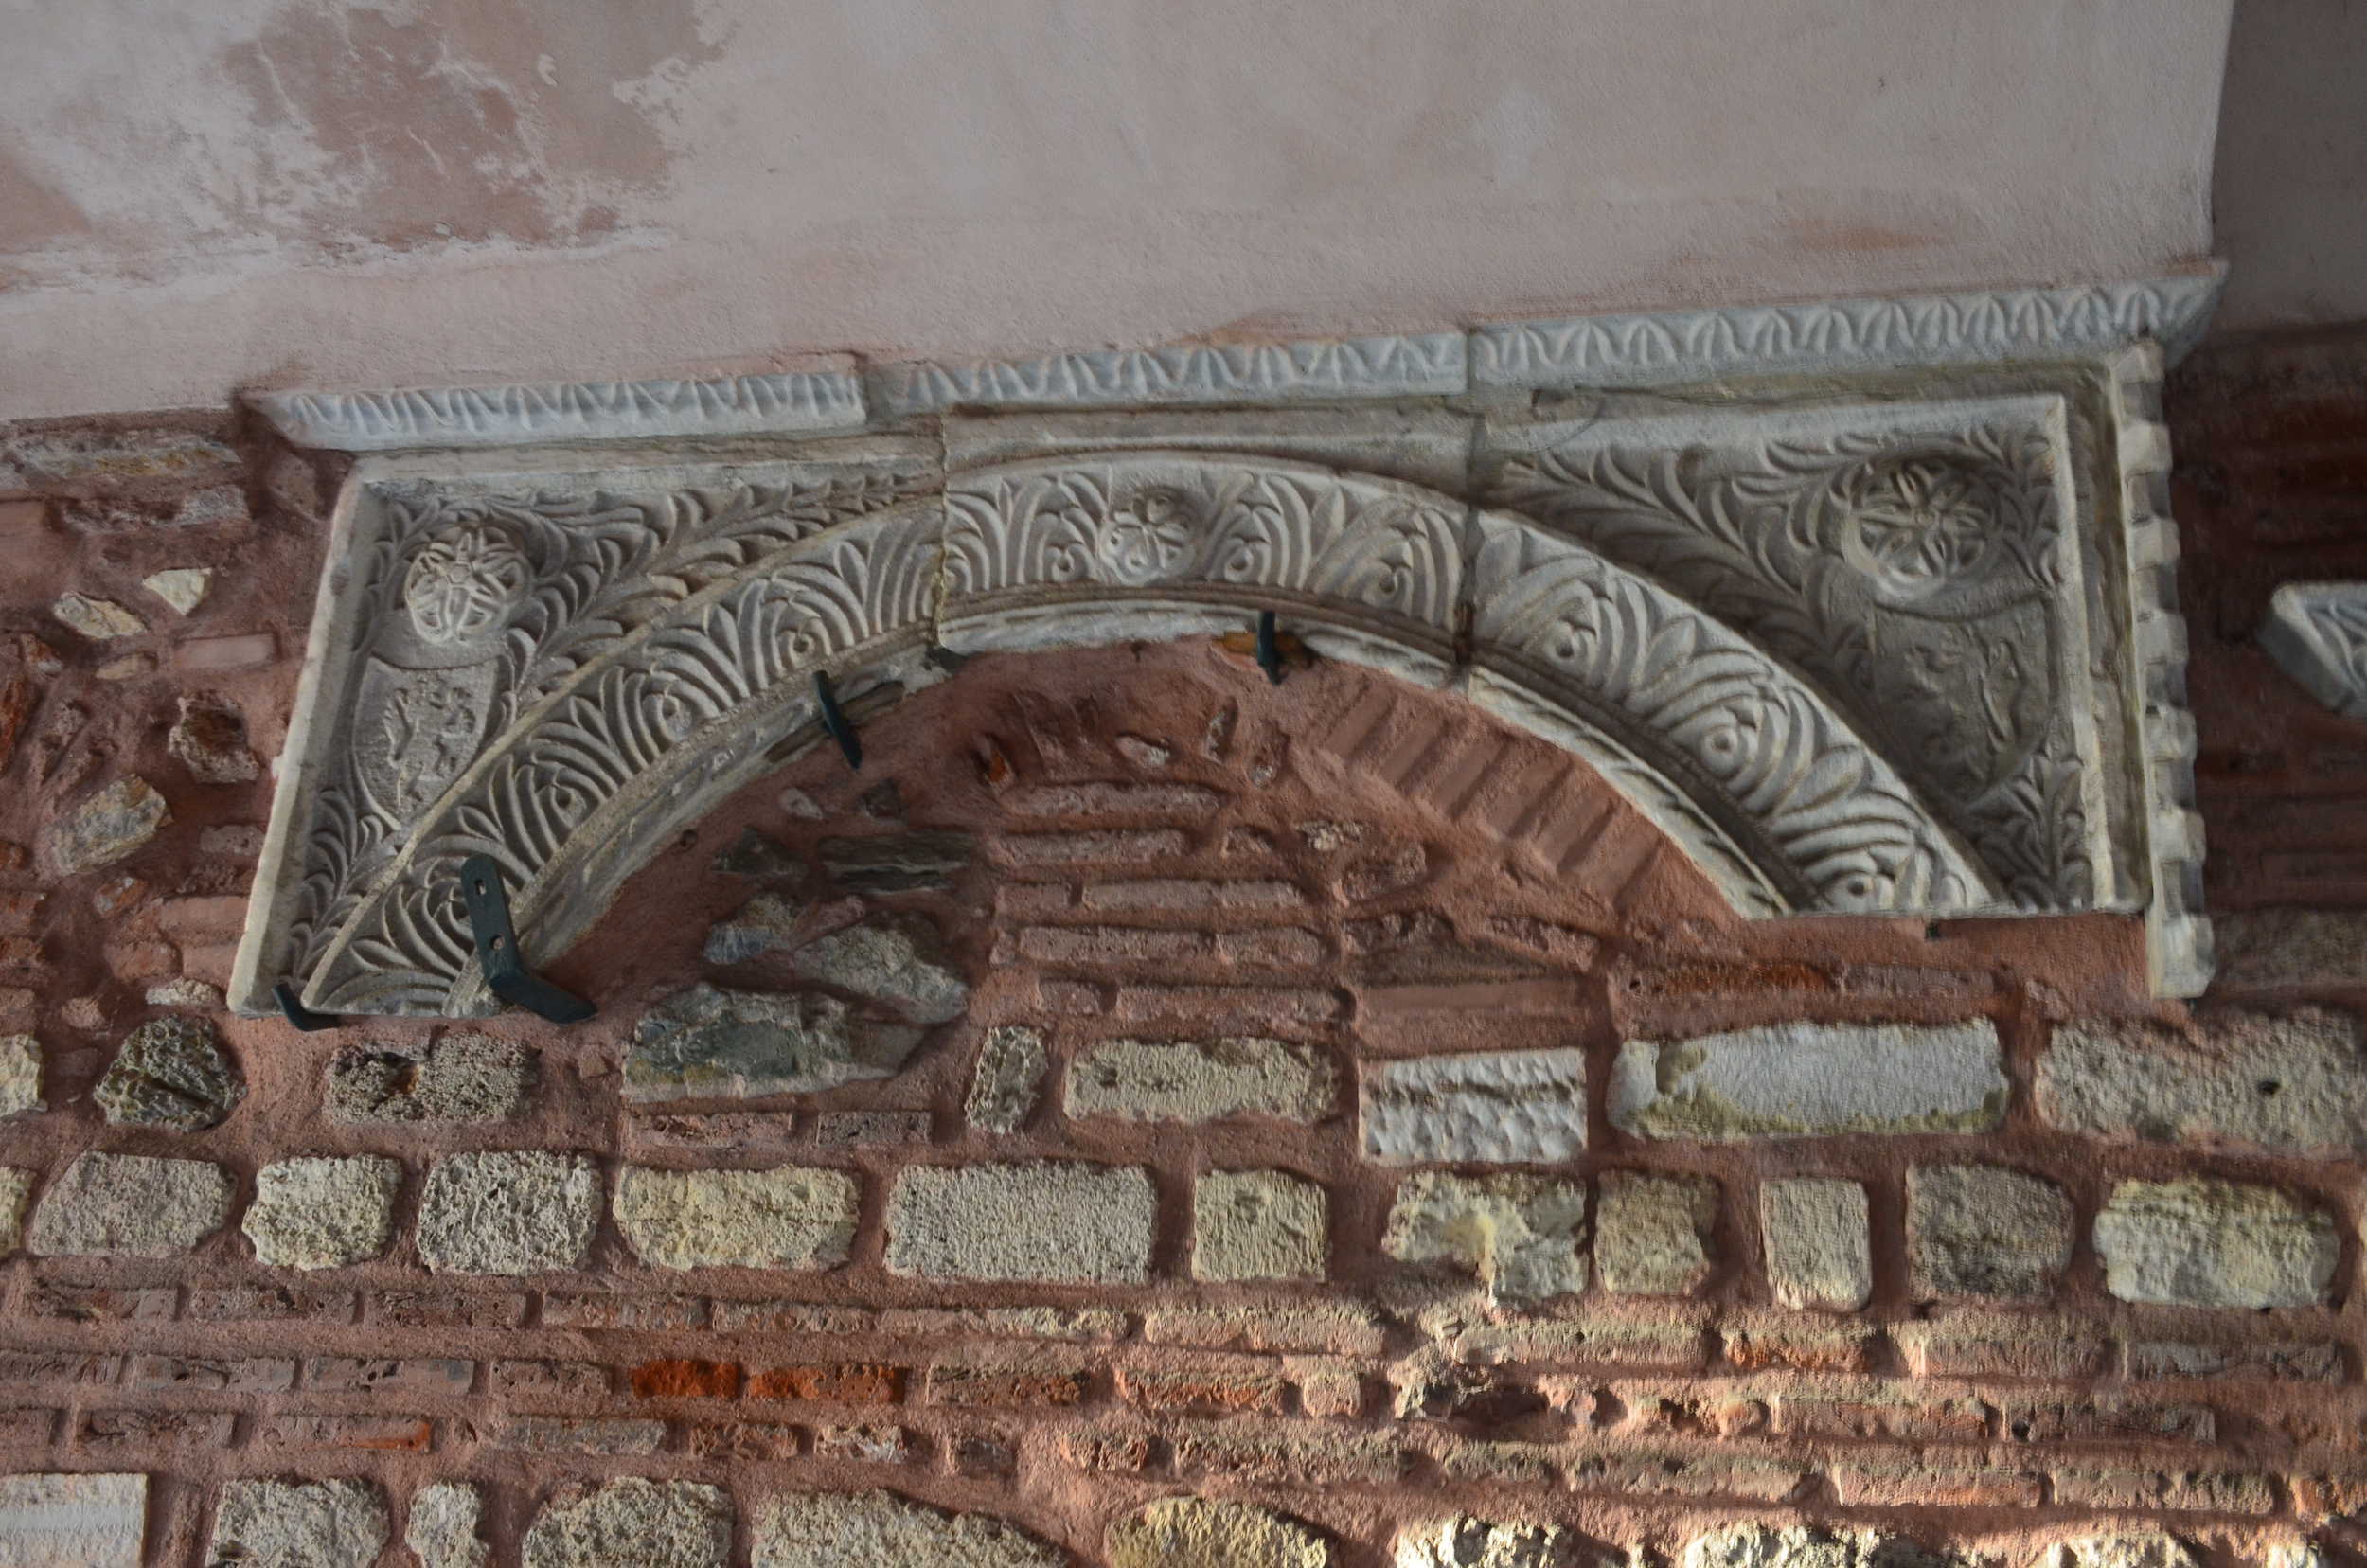 Stone fragments under the bell tower at the Arab Mosque in Istanbul, Turkey